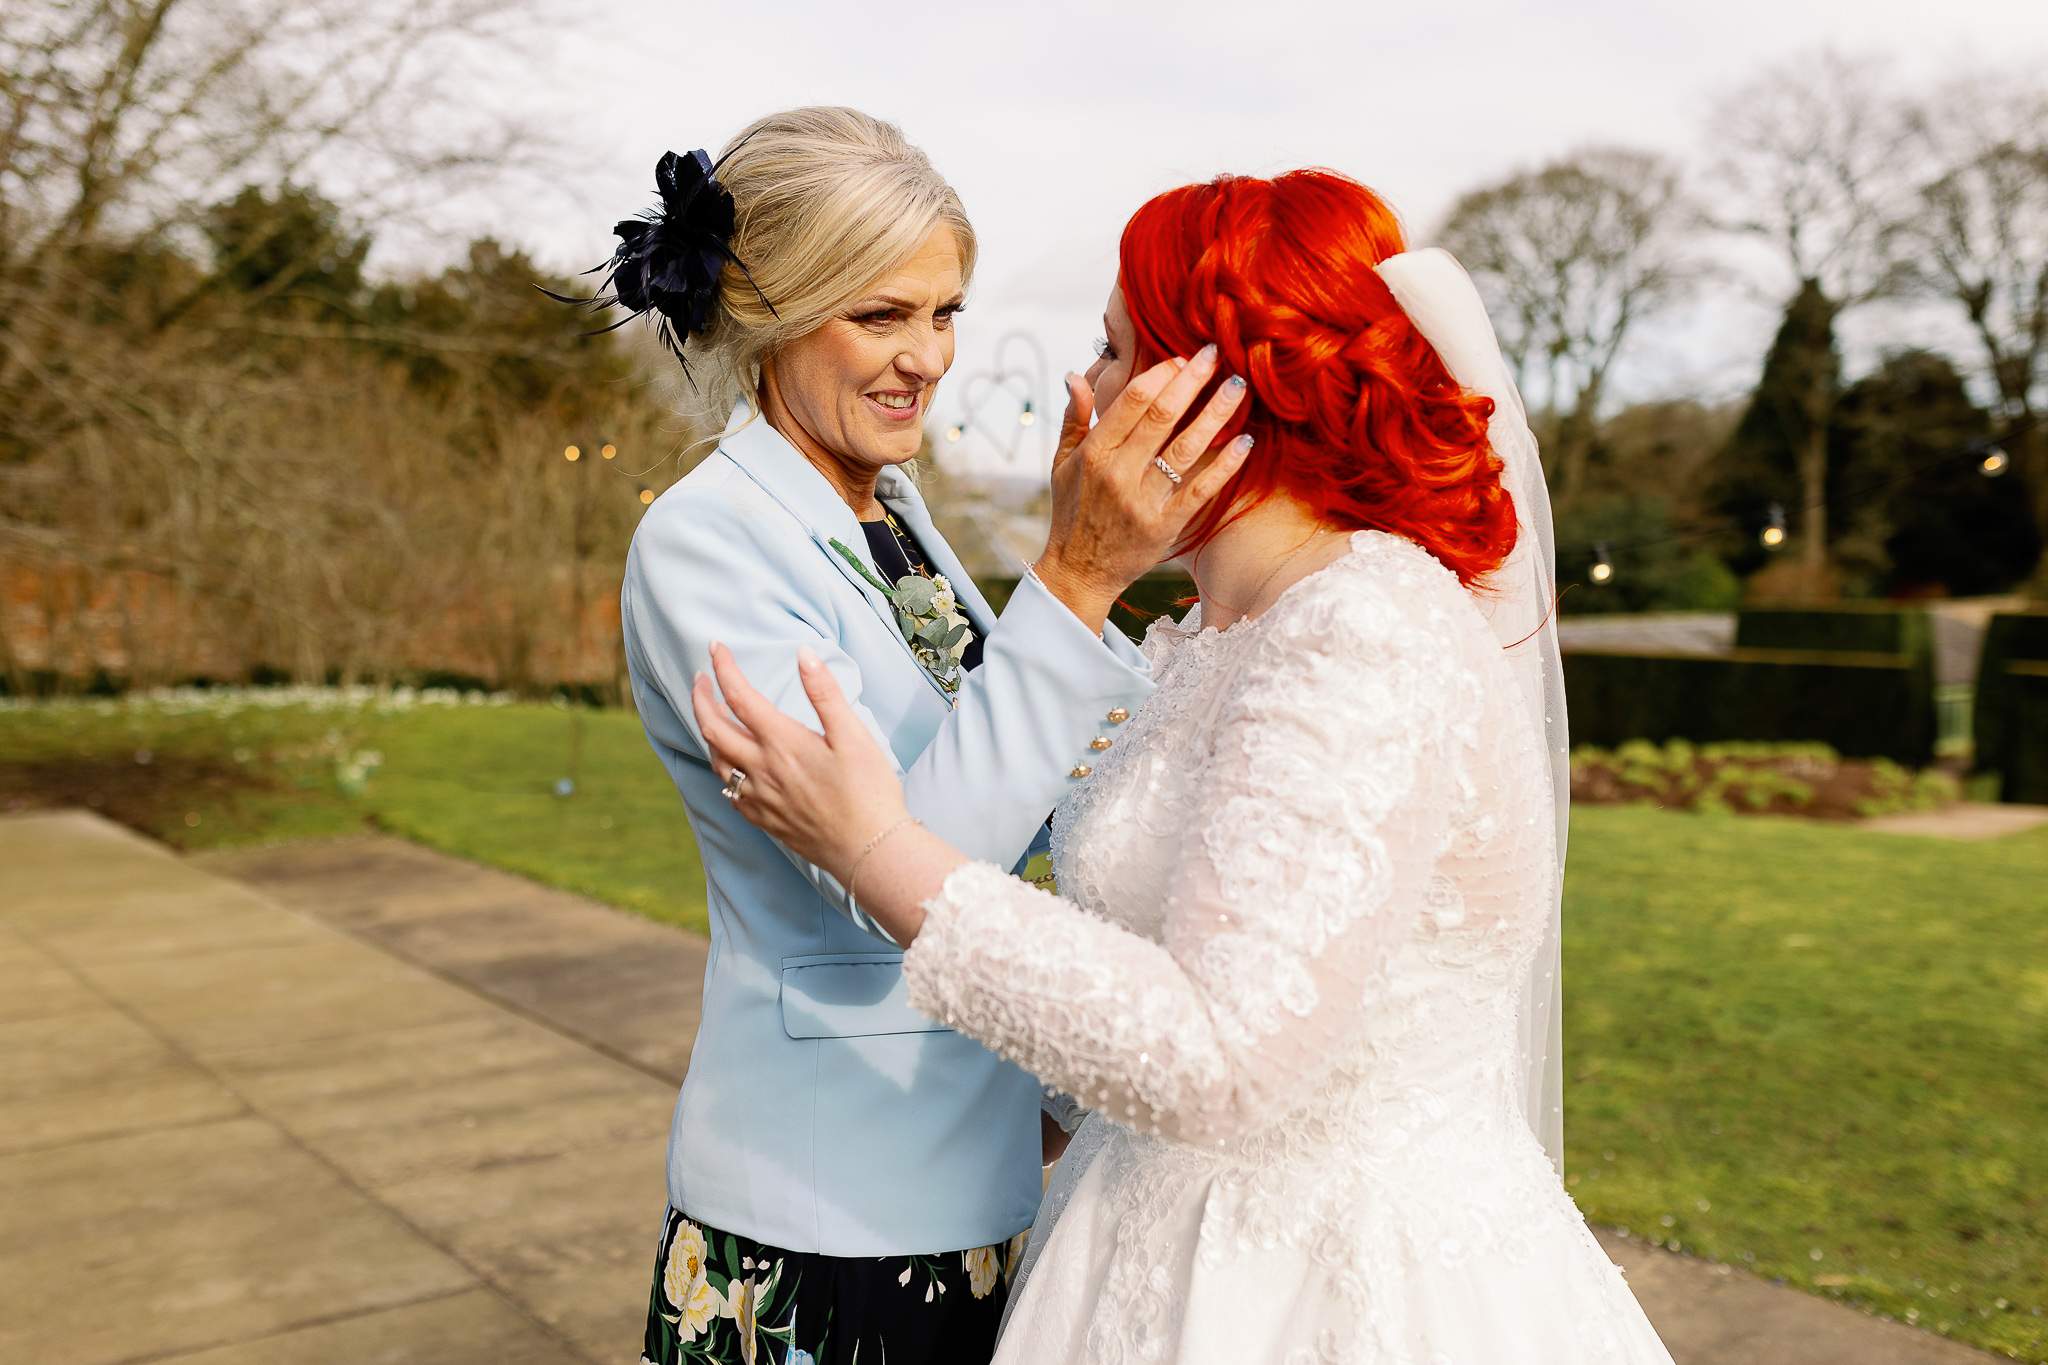 Mum and daughter candid images at a wedding 